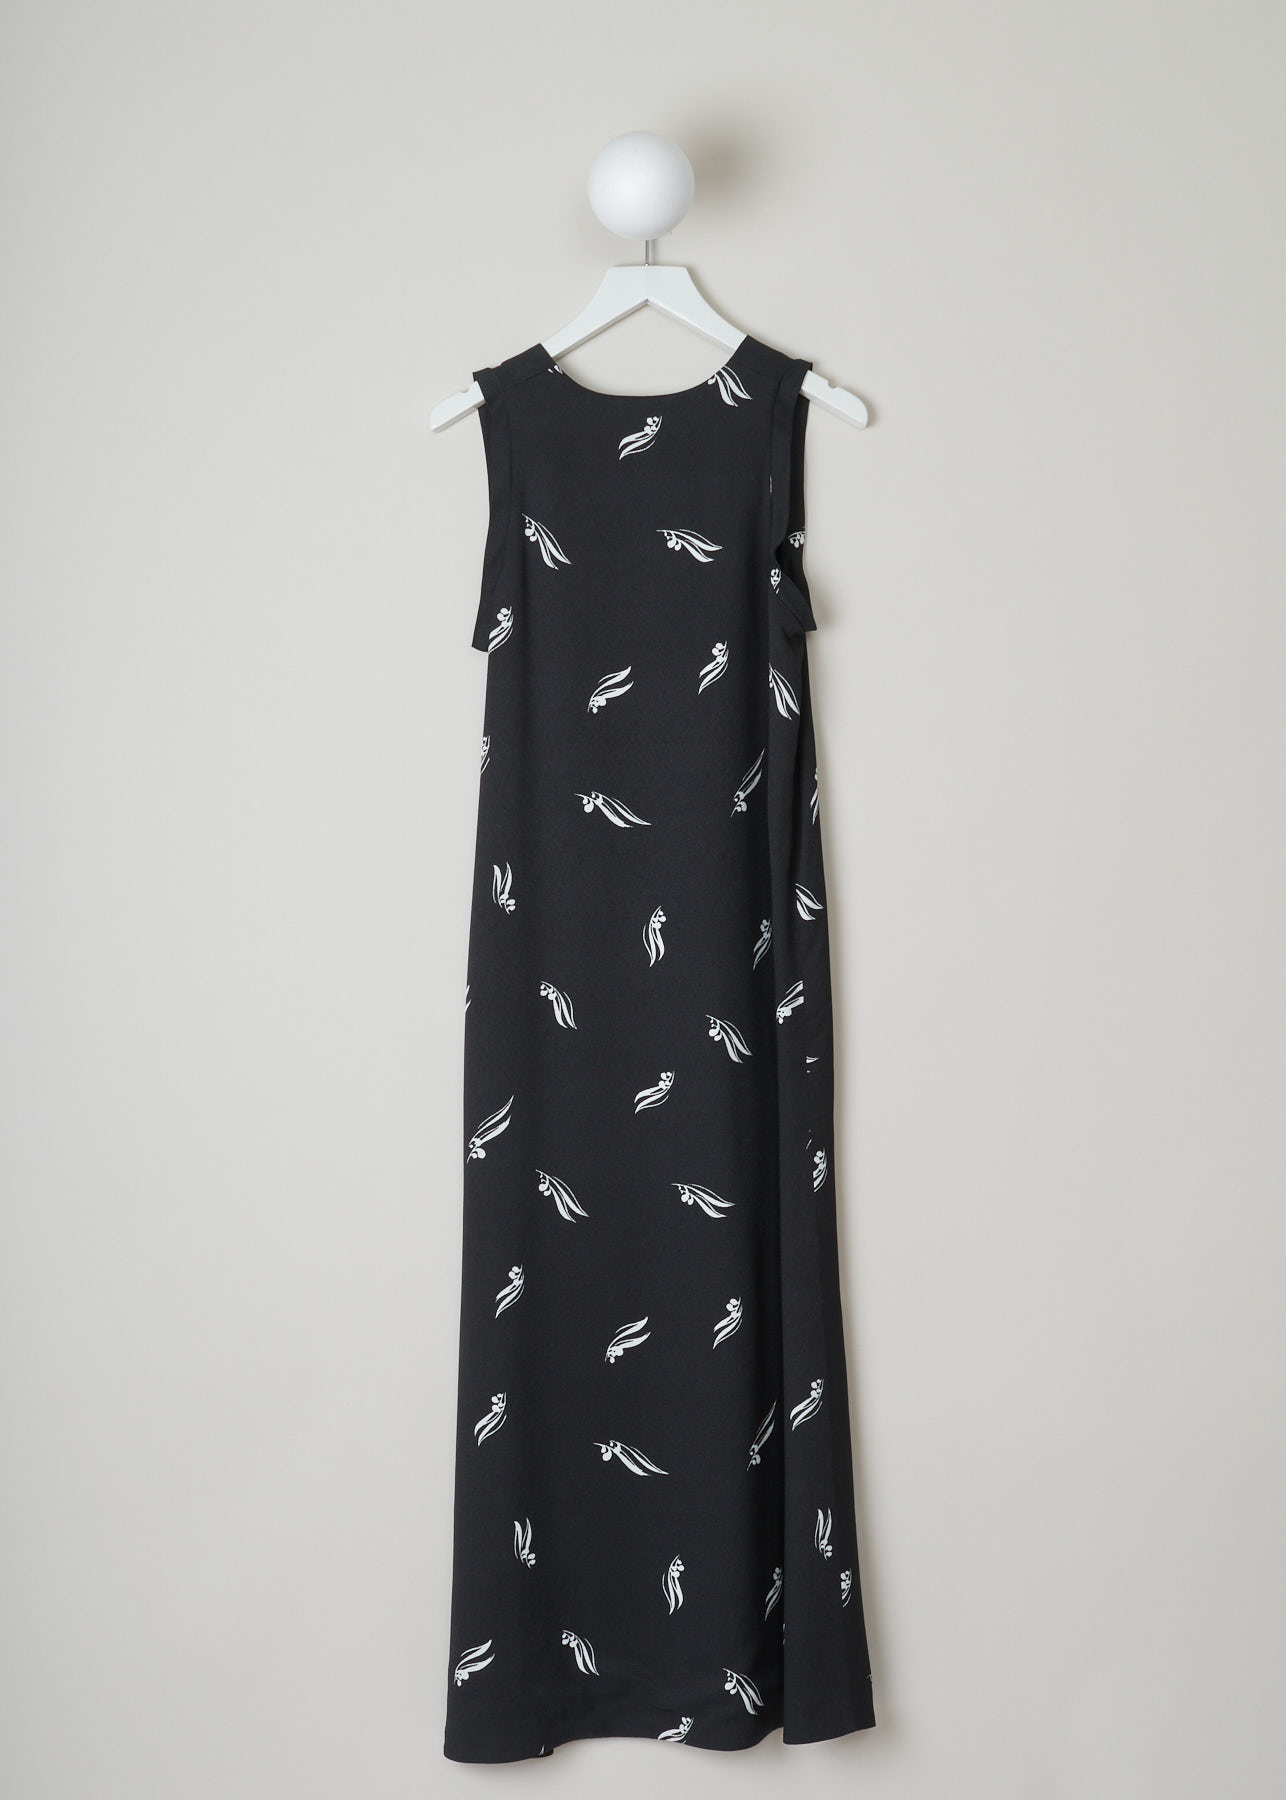 Marni, long black sleeveless dress, ABMAT87JUY_TV478_OPN99_Black, black, back, Maxi black sleeveless dress. High neckline, with an fun white print looking similar to cherries on the stem.  